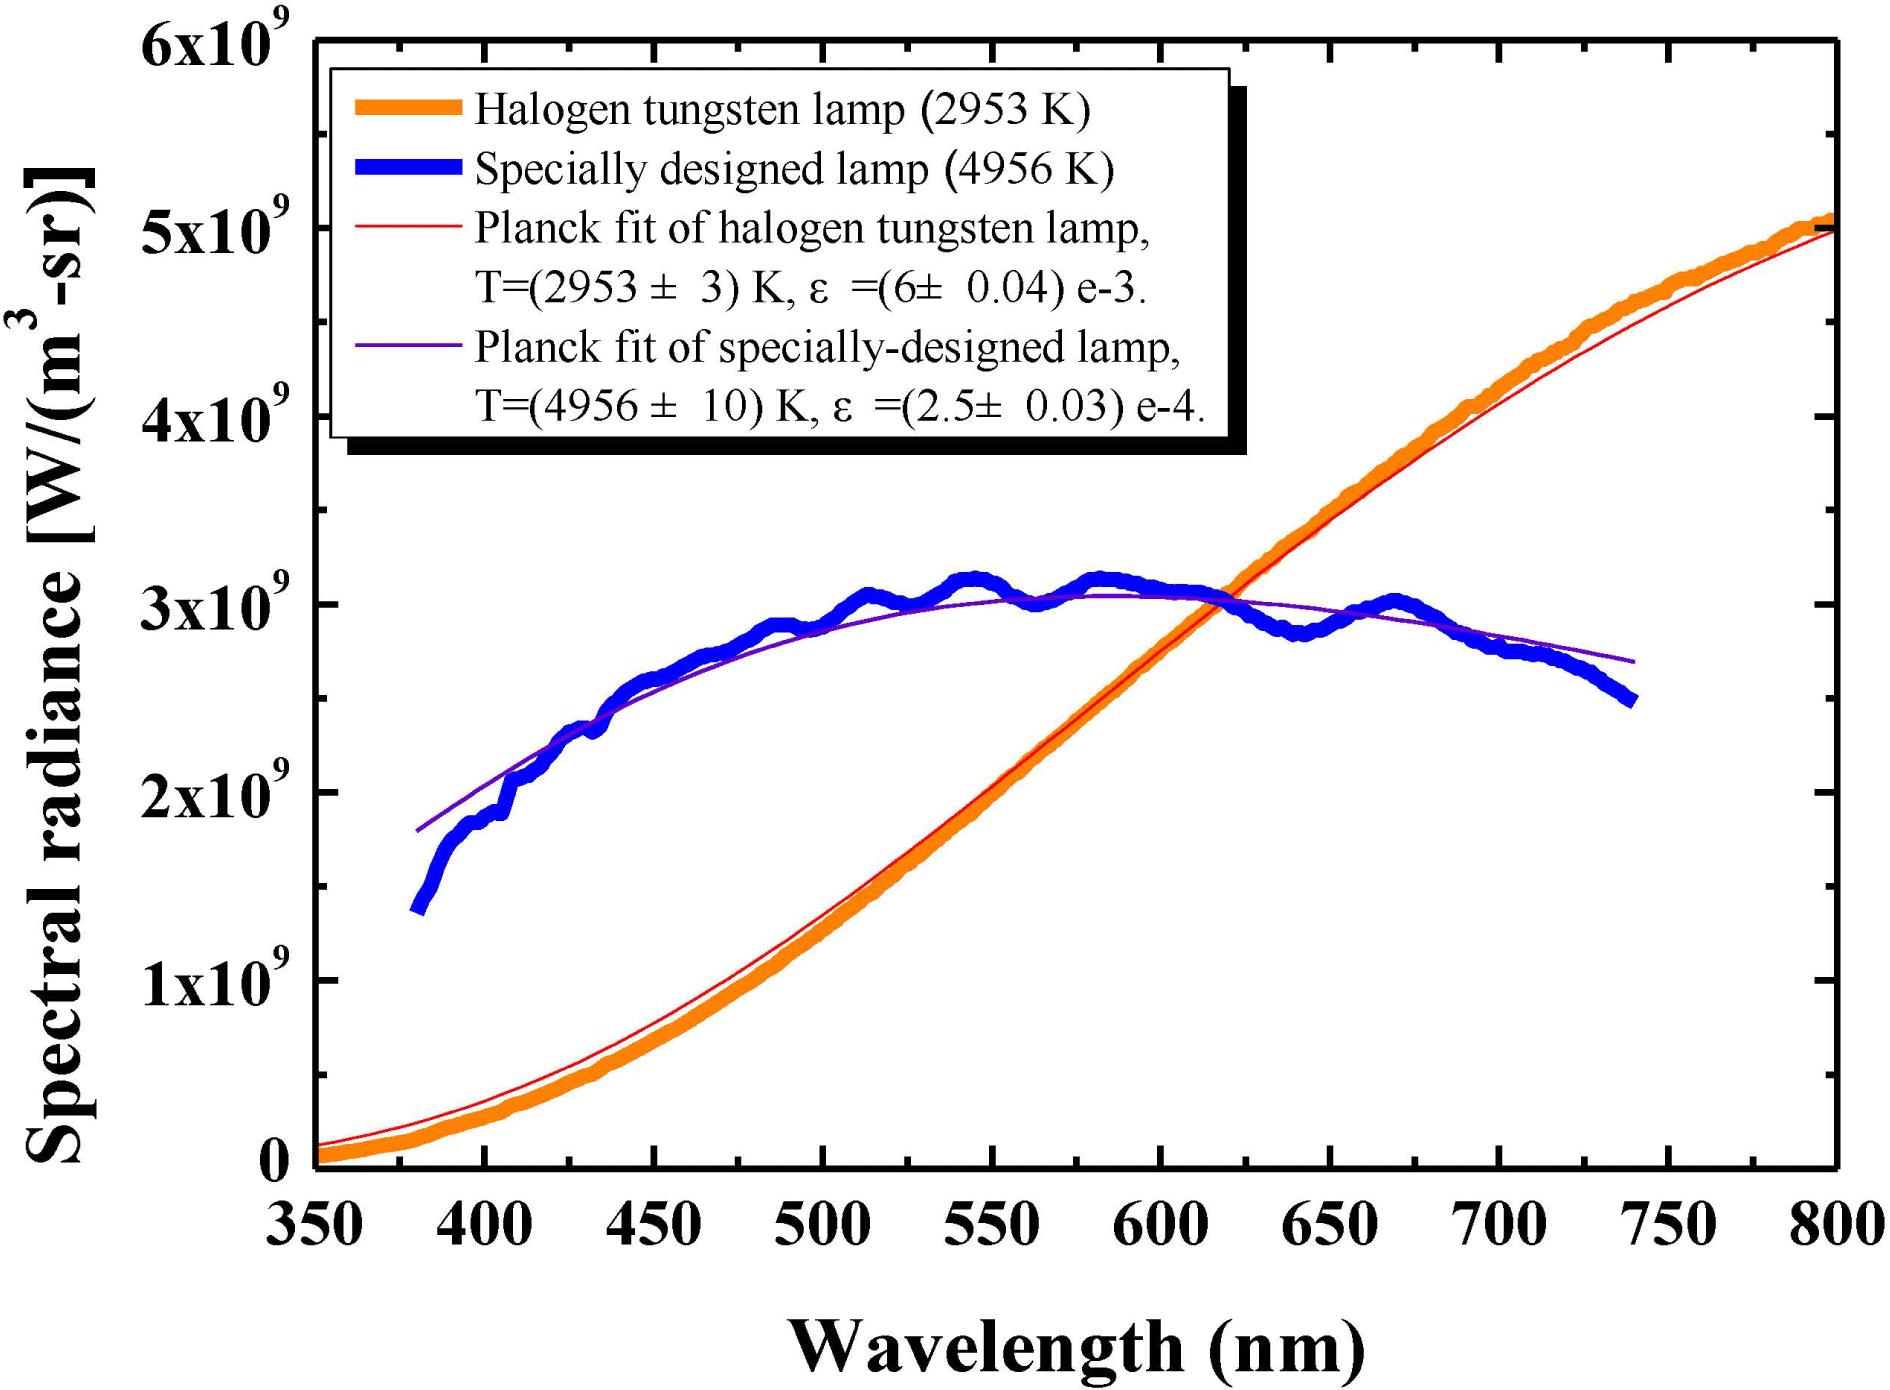 Spectral radiance and Planck fit of the lower-color-temperature $({\sim}3000~\text{K})$ halogen tungsten lamp (thick orange line and thin red line) and the higher-color-temperature $({\sim}5000~\text{K})$ specially designed lamp (thick blue line and thin purple line).